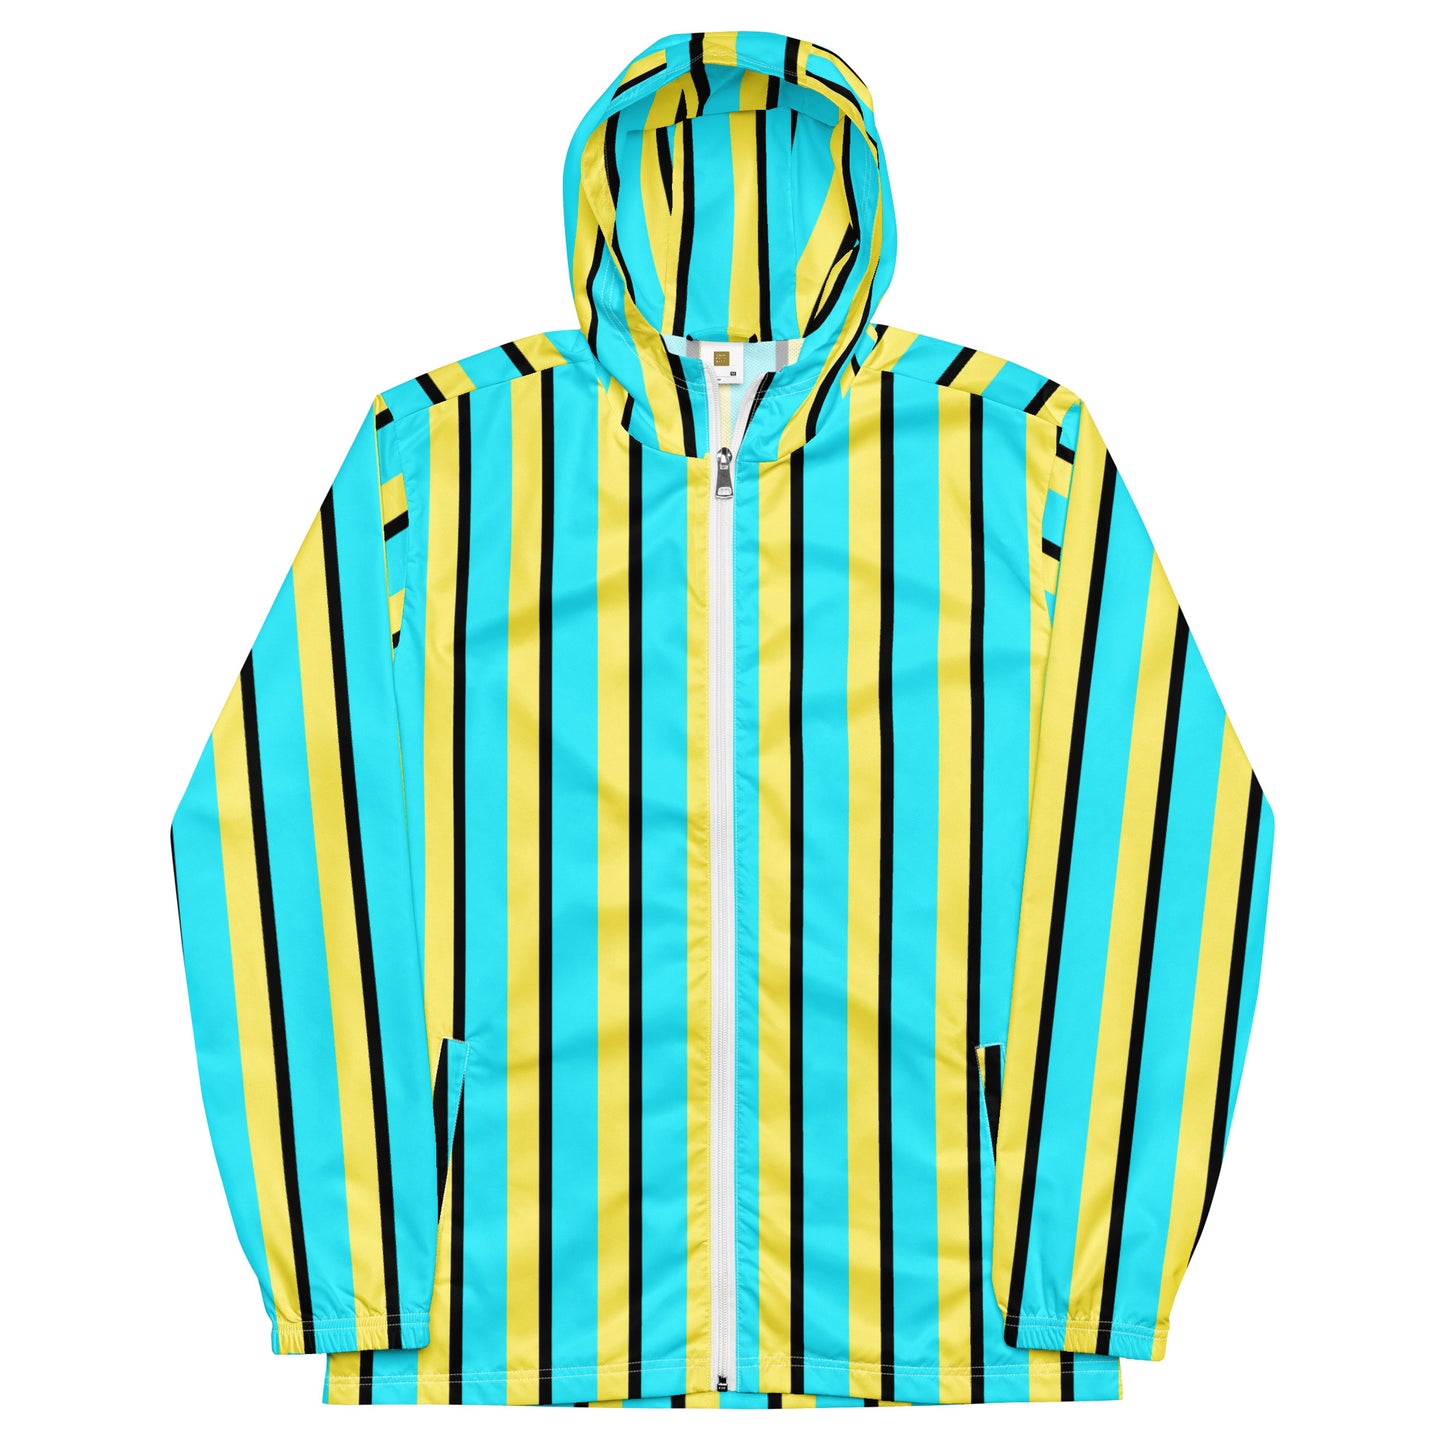 Vintage Stripes - Inspired By Harry Styles - Sustainably Made Men’s windbreaker